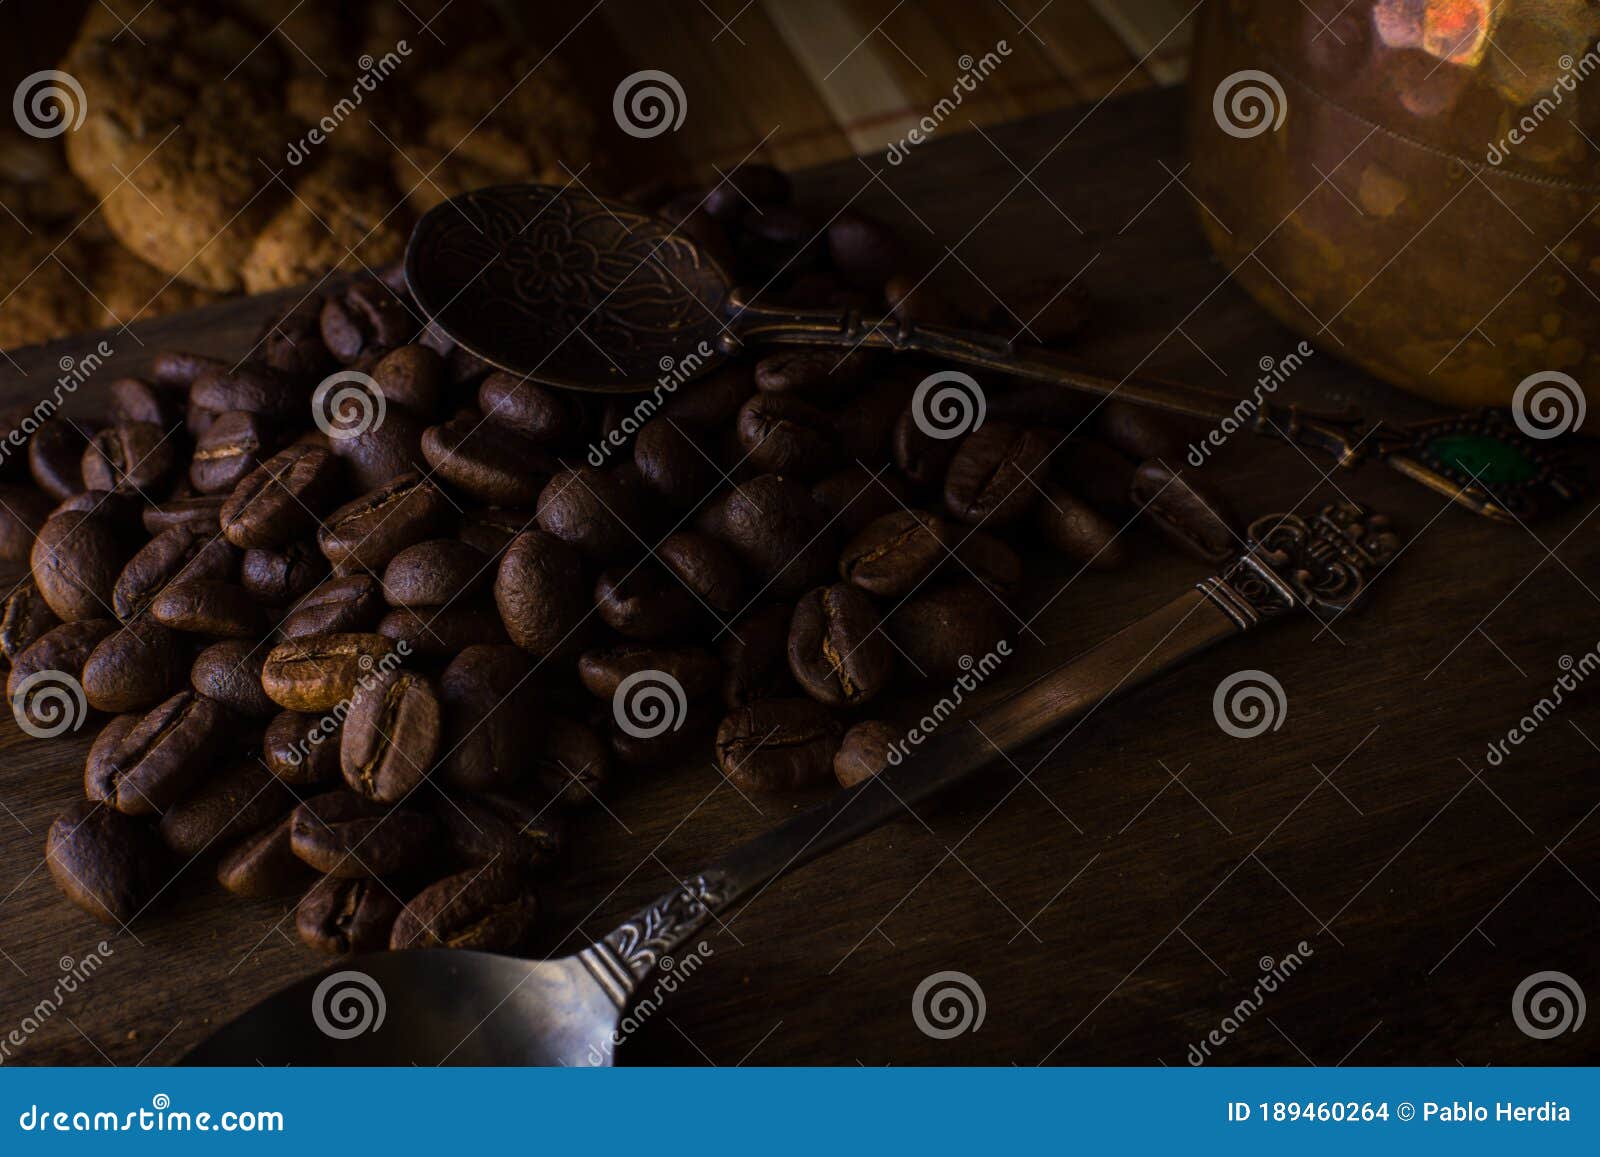 coffee beans on wood with spoons and cookies